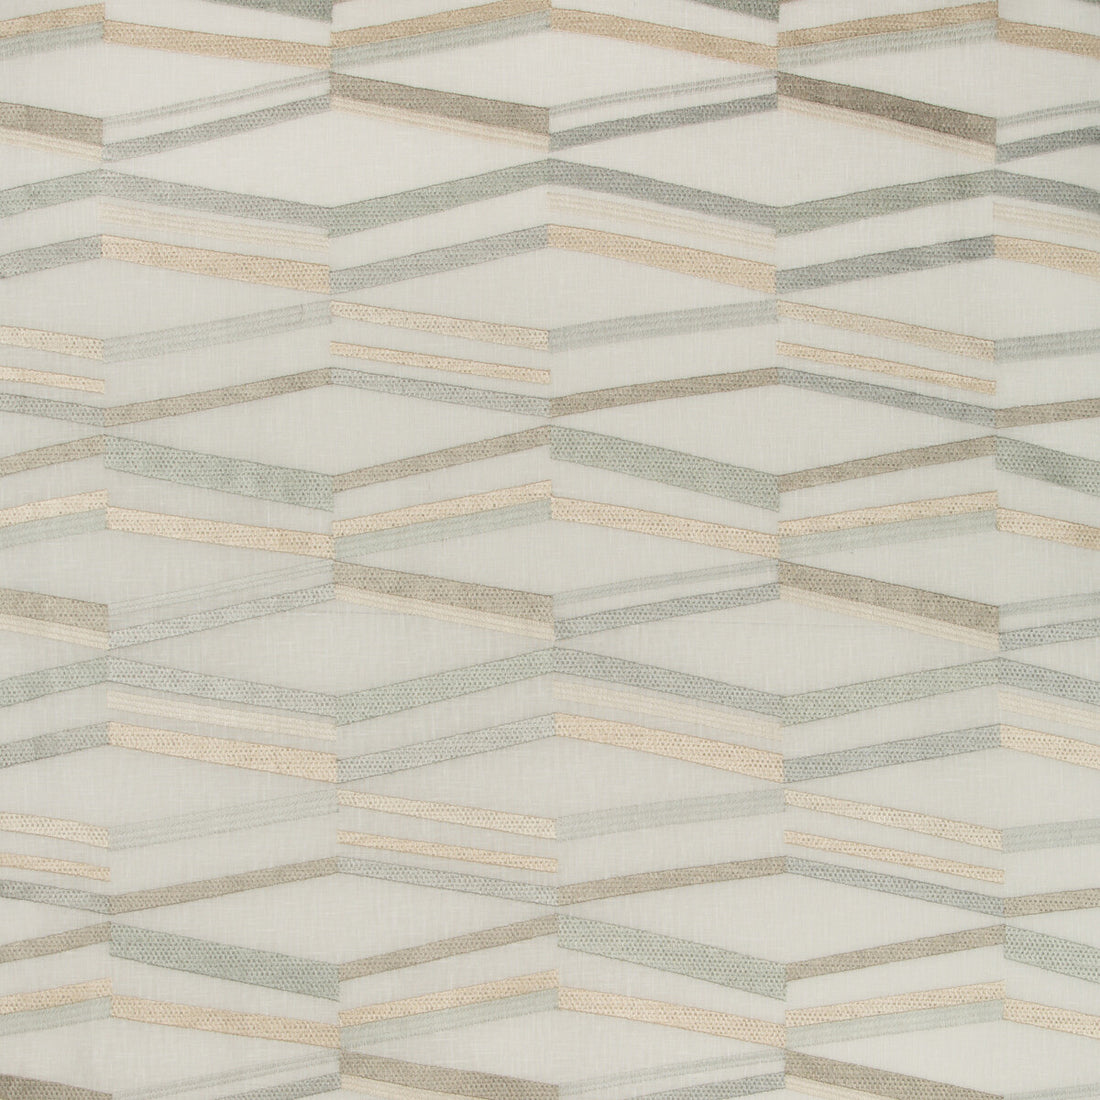 Parabola fabric in mineral color - pattern 4248.1311.0 - by Kravet Couture in the Sue Firestone Malibu collection